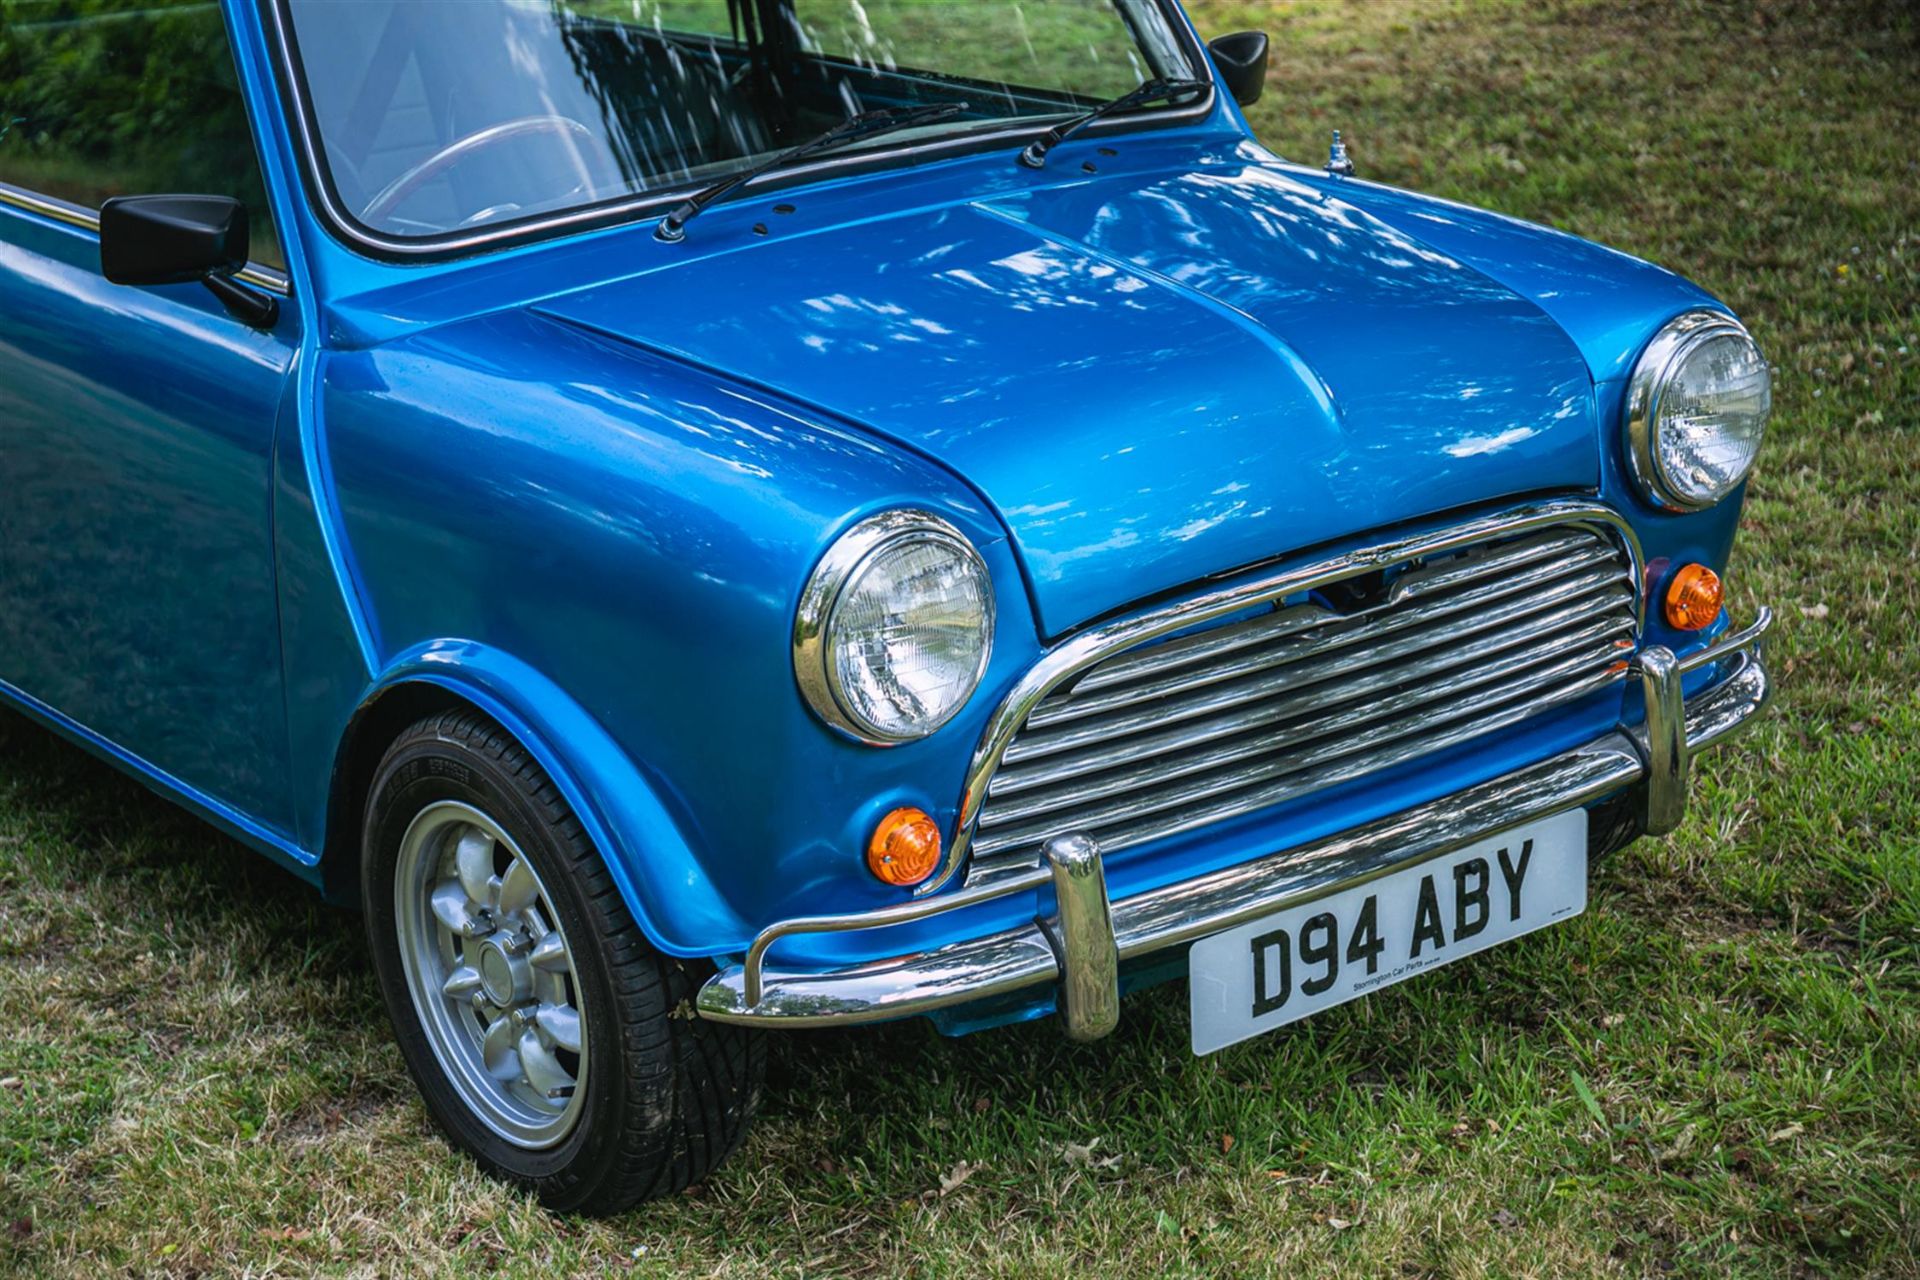 1986 Austin Mini Mayfair - 1275 Special - Image 8 of 10